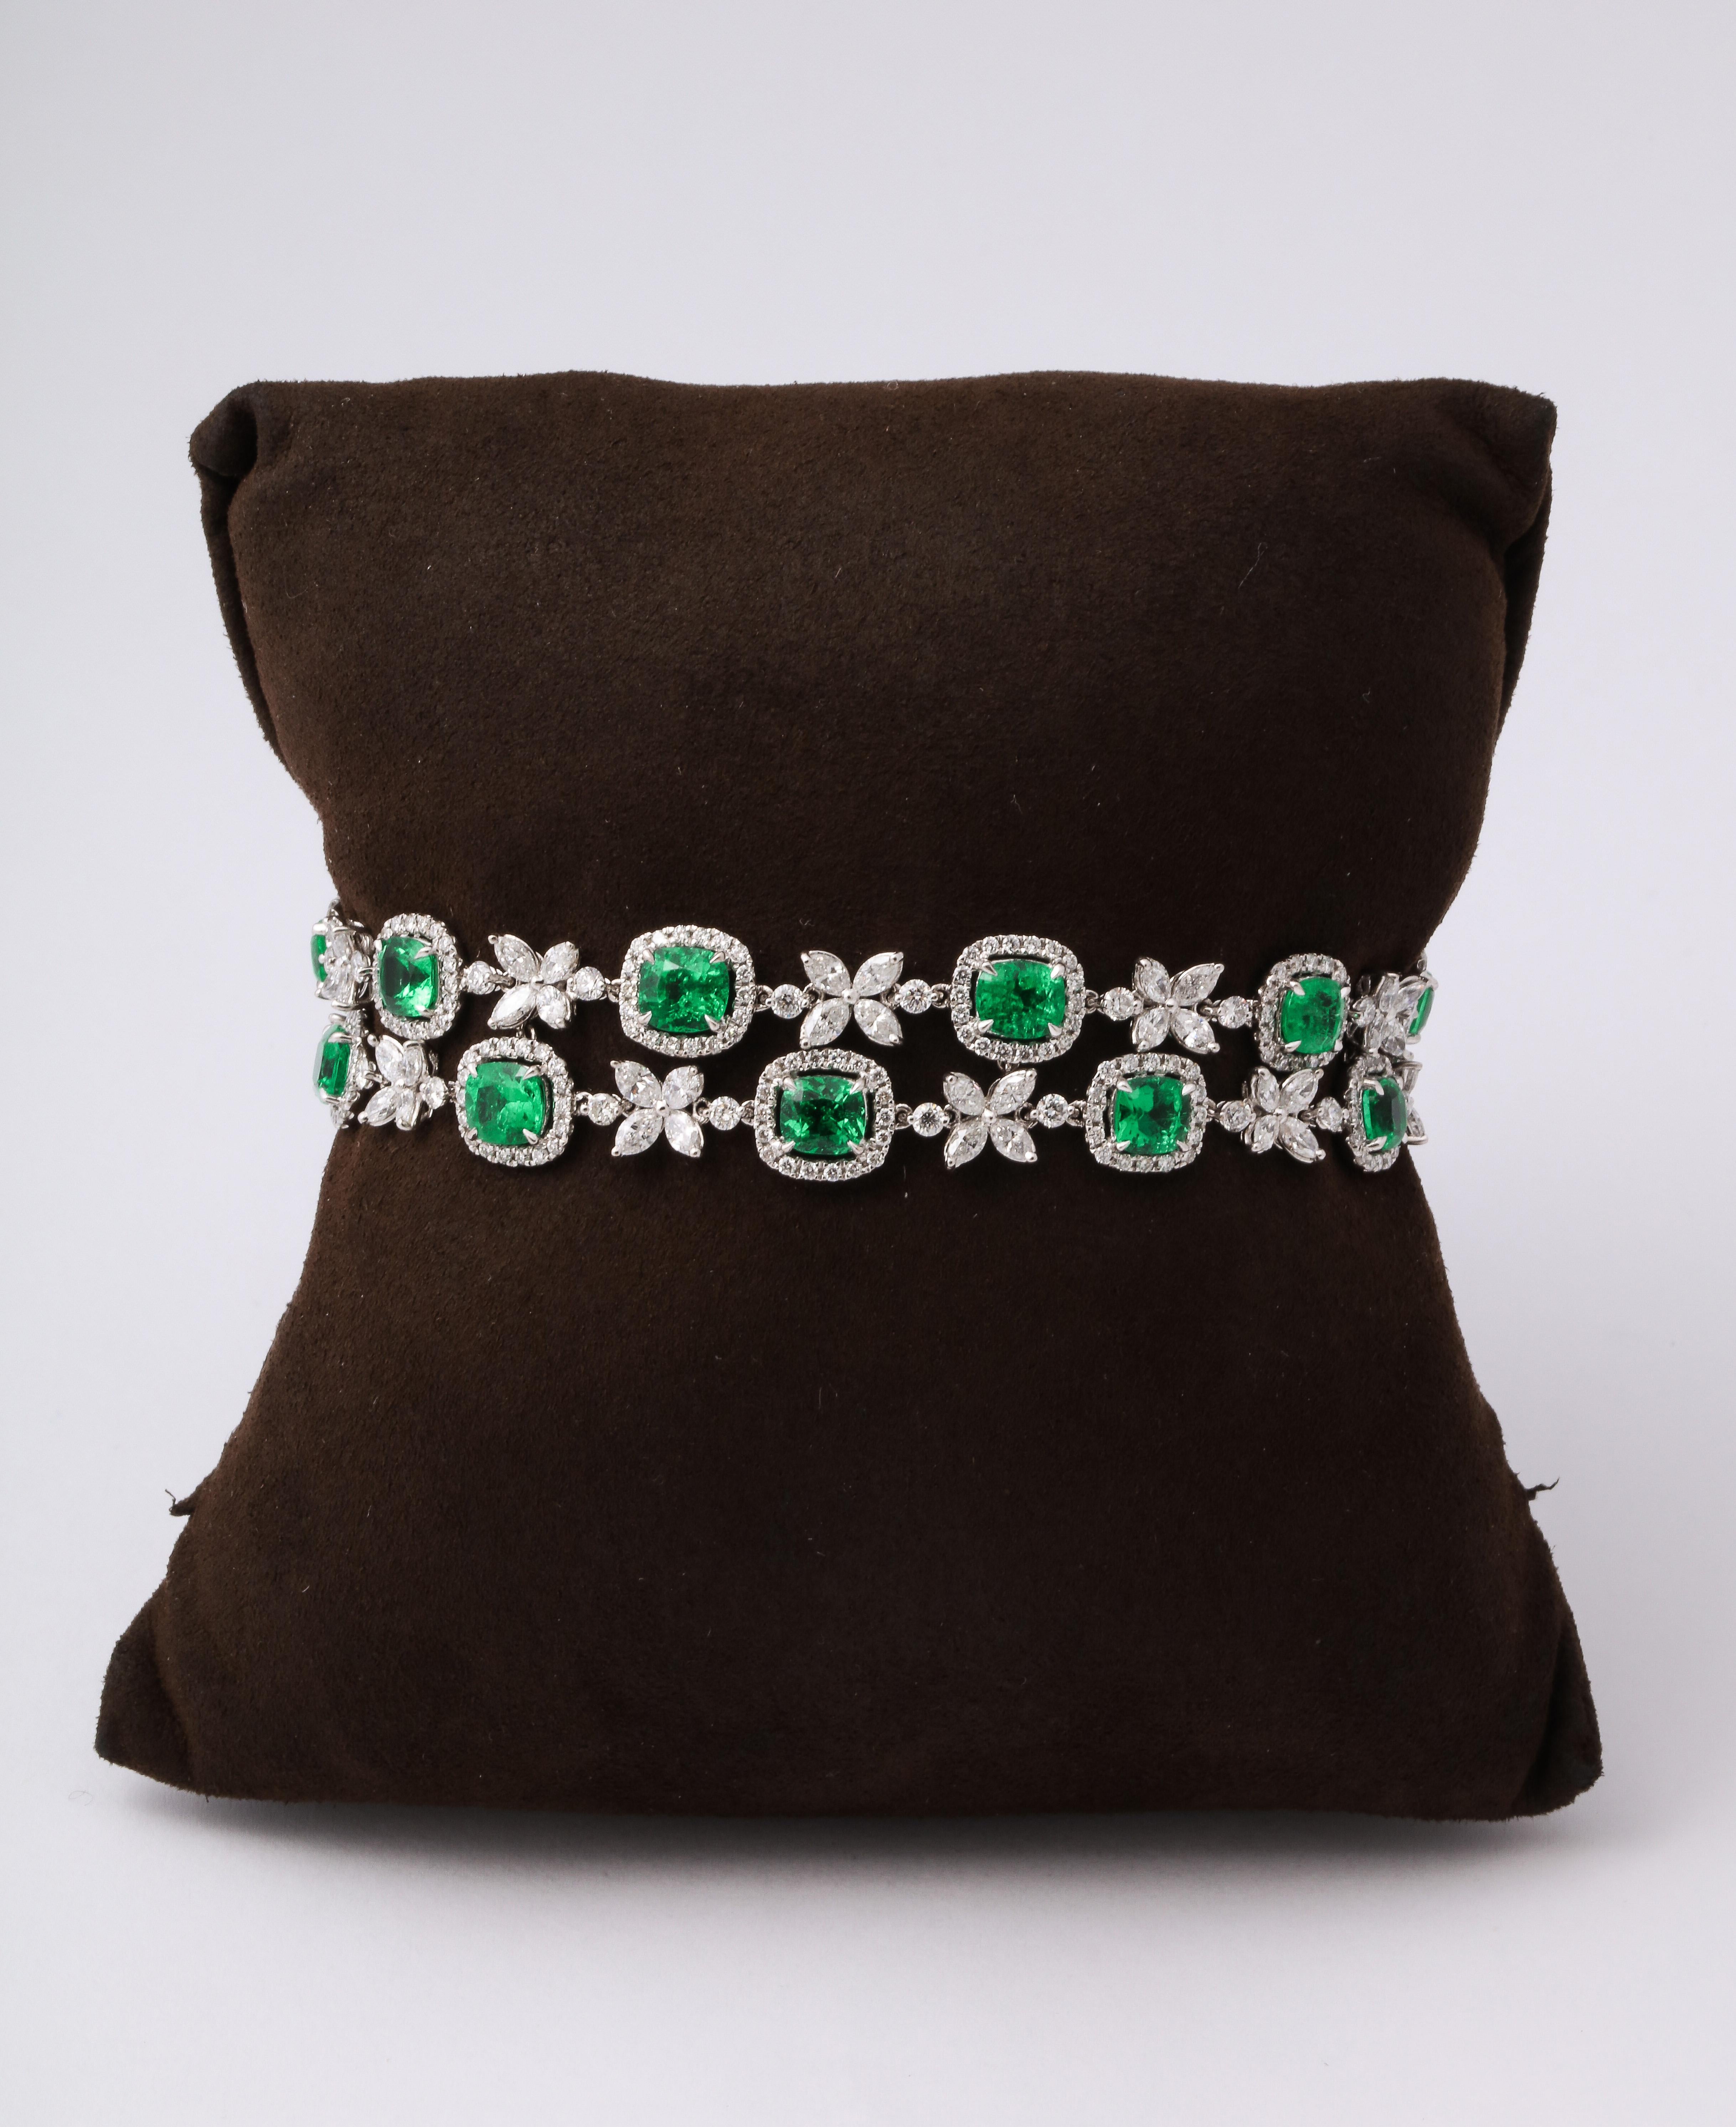 An elegant bracelet with a pop of color. 

9.37 carats of fine quality cushion cut emeralds.

6.72 carats of white marquise and round diamonds. 

18k white gold 

6.75 inch length, half an inch wide. 